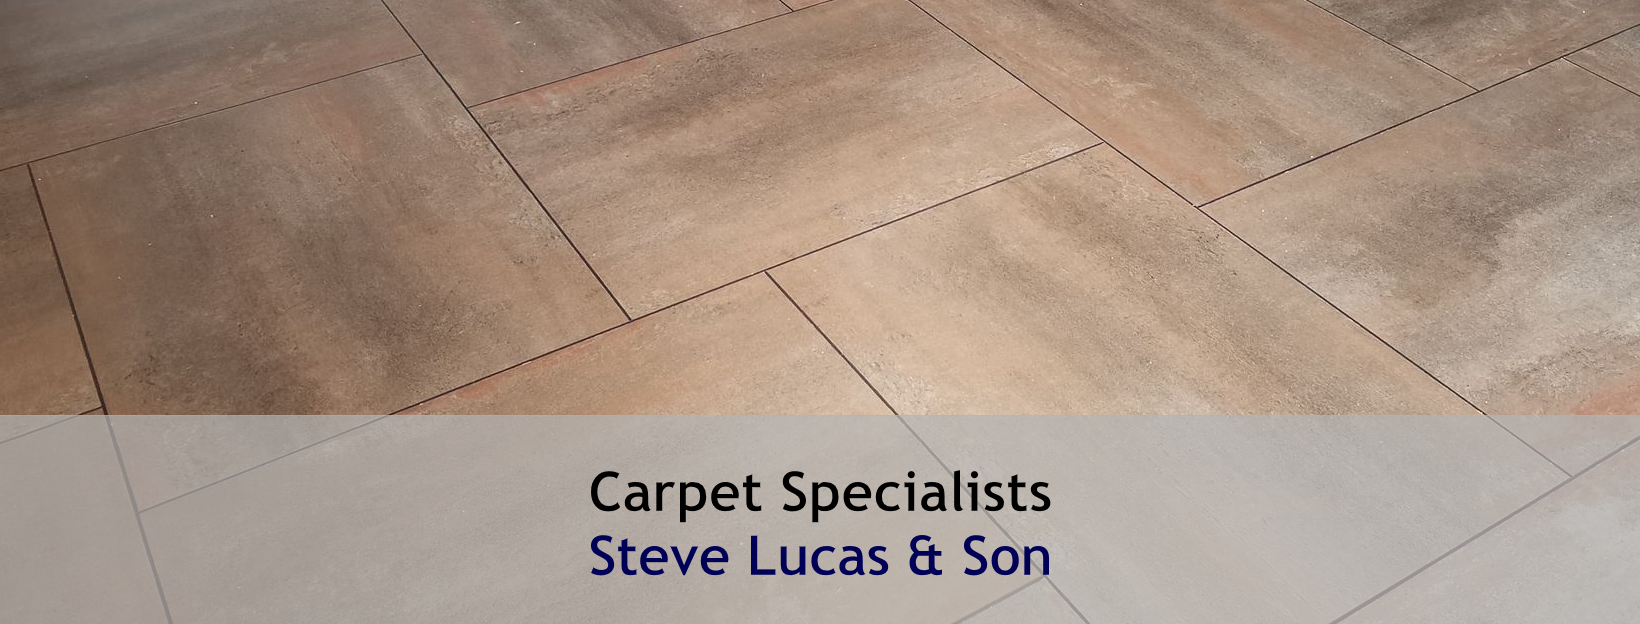 Steve Lucas and Son - Carpet Specialists based in Dorset